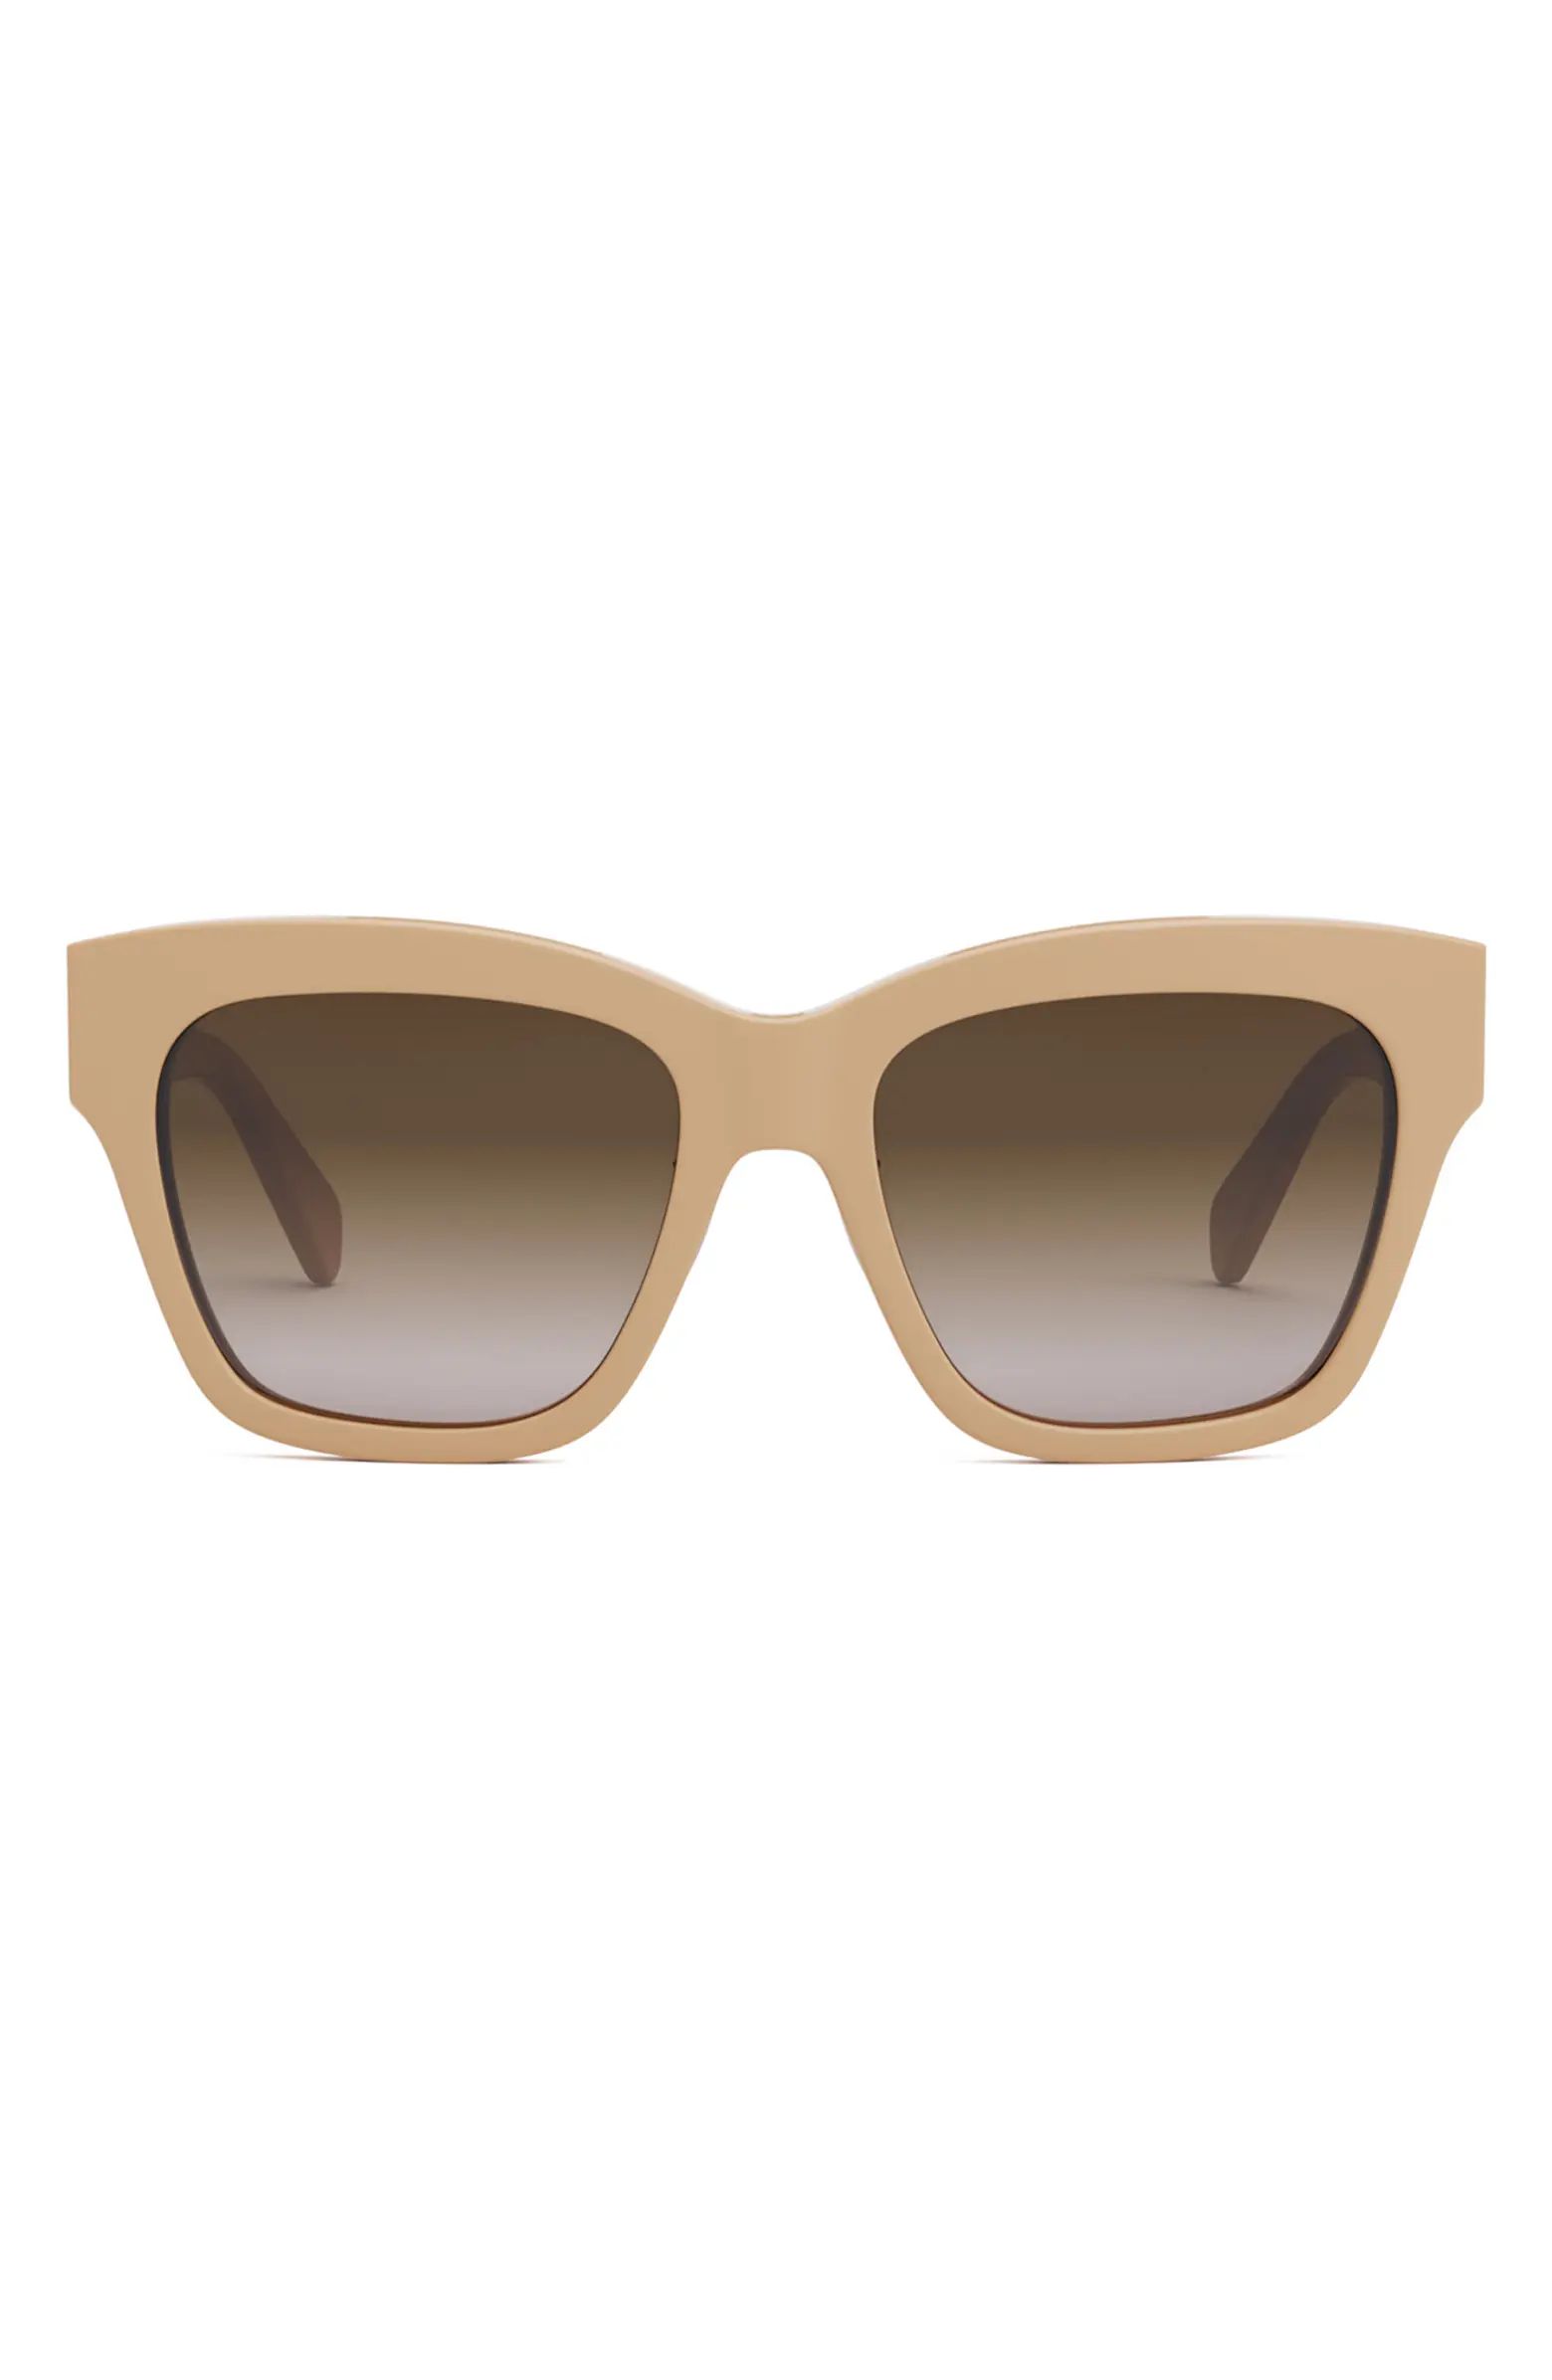 Sleek square frames elevate these eye-catching Italian-made sunglasses fitted with gradient lense... | Nordstrom